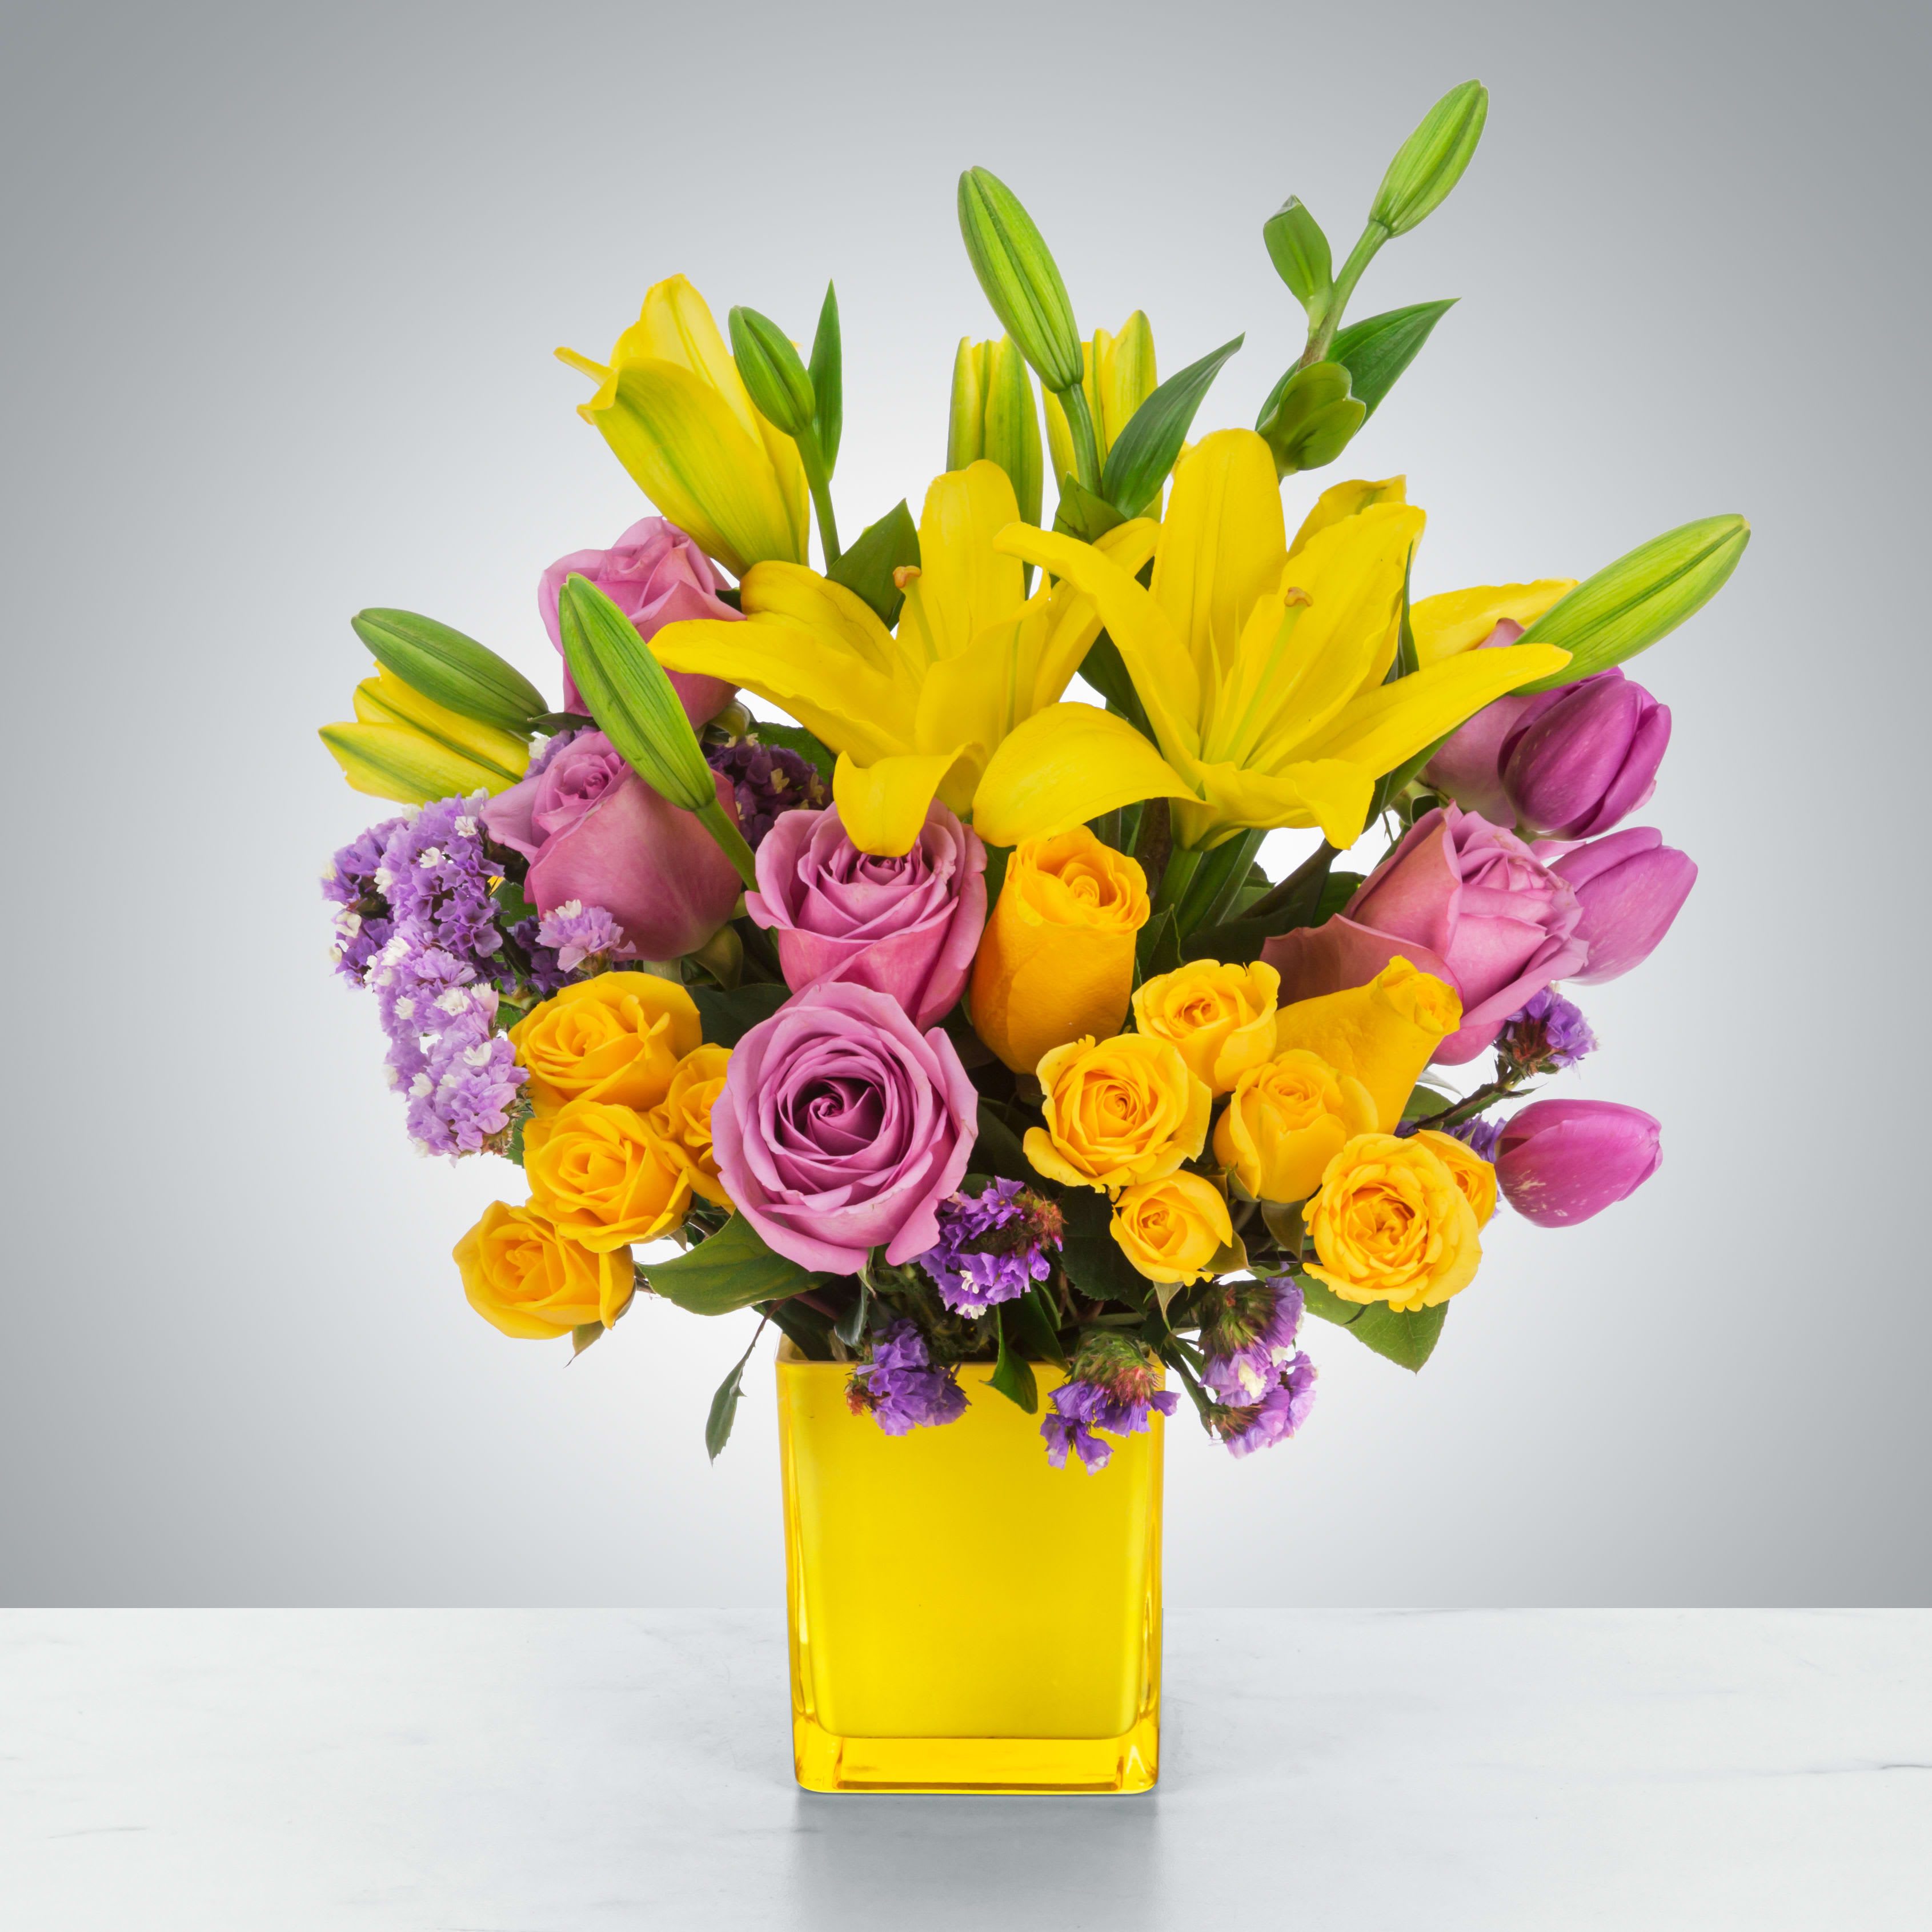 Sunday Afternoon by BloomNation™ - This arrangement is a sweet surprise for any recipient. Featuring a selection of yellow and purple flowers in a yellow vase, this arrangement is springtime in flower form and a great gift for Easter or Passover.  Approximate Dimensions: 13&quot;D x 16&quot;H